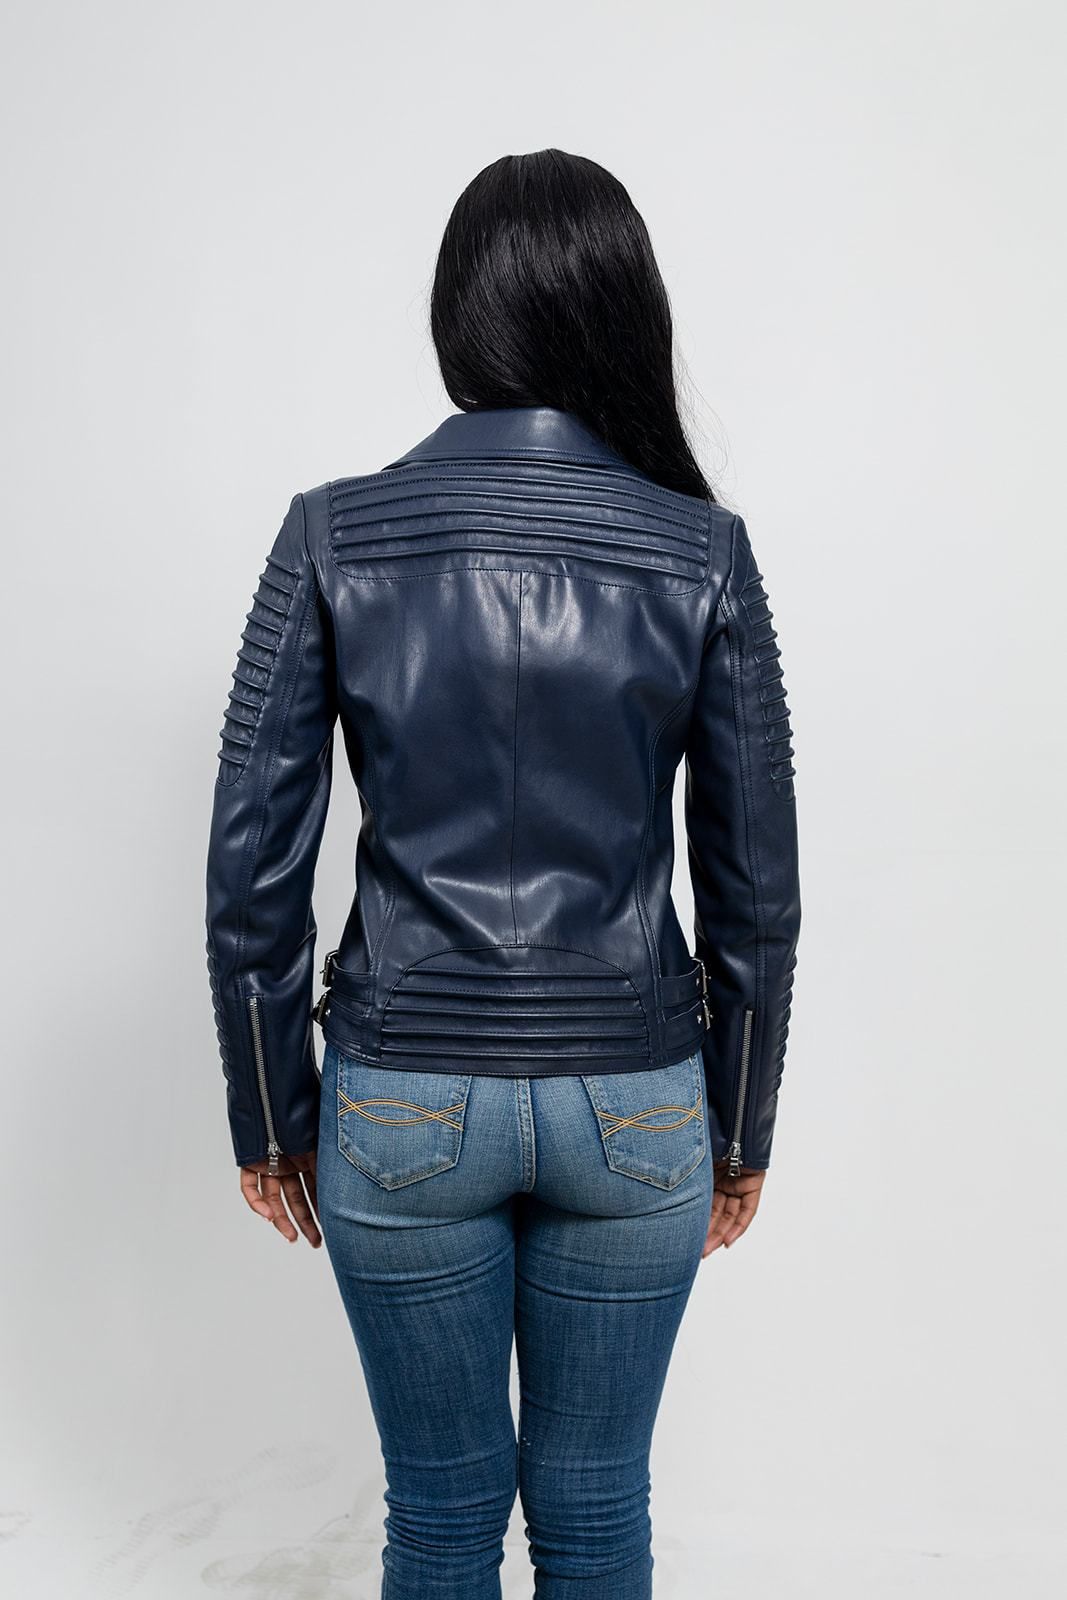 The back view of a woman wearing the First Manufacturing Paris - Women's Vegan Leather Jacket, Navy Blue featuring exposed zippers.